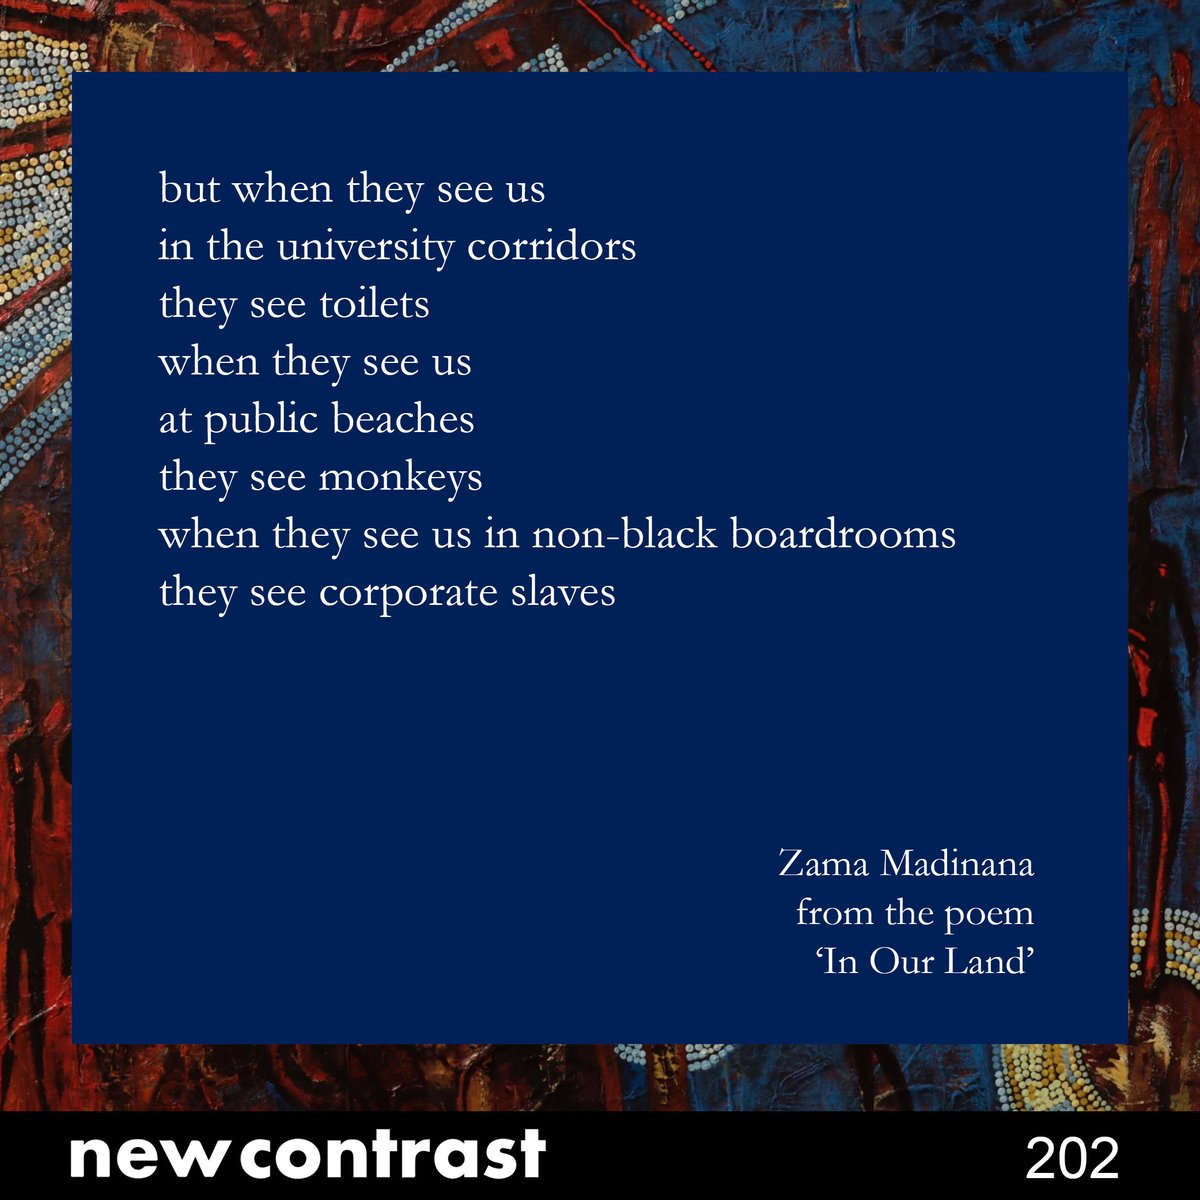 New Contrast 202 preview featuring the poem 'In Our Land' by Zama Madinana #winter #poetry #literarymagazine #southafricanart #artsandculture